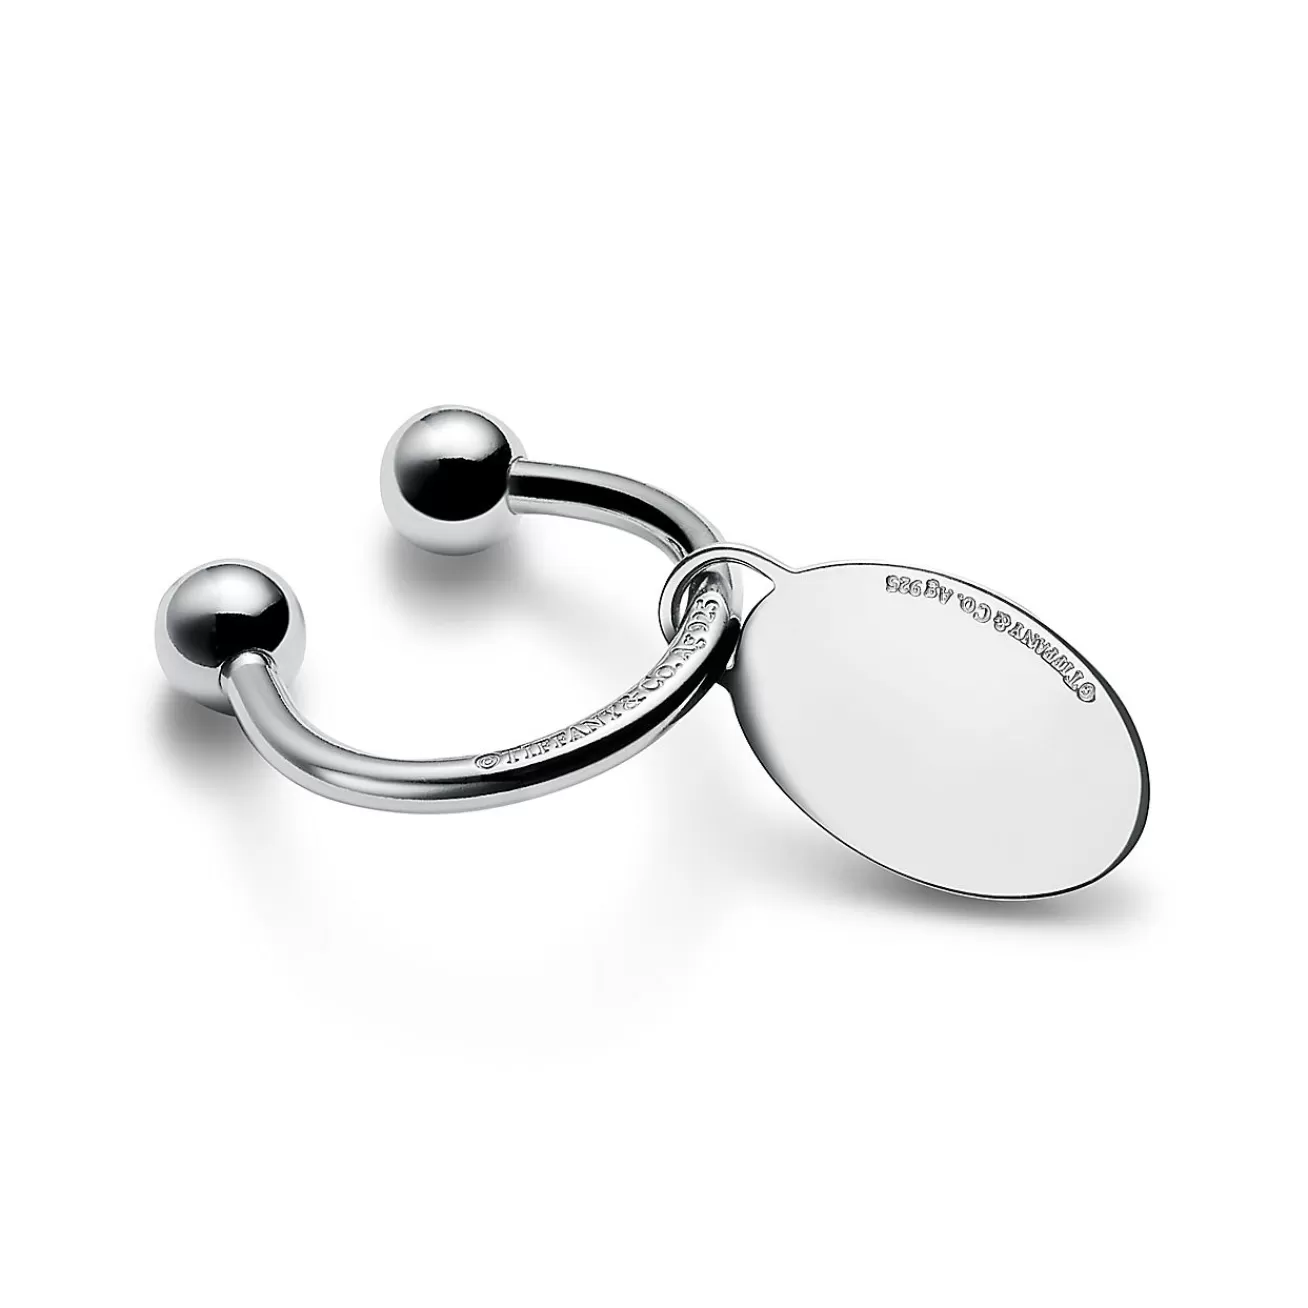 Tiffany & Co. Personal Essentials Oval Tag Screwball Key Ring in Sterling Silver | ^Women Gifts to Personalize | Key Rings